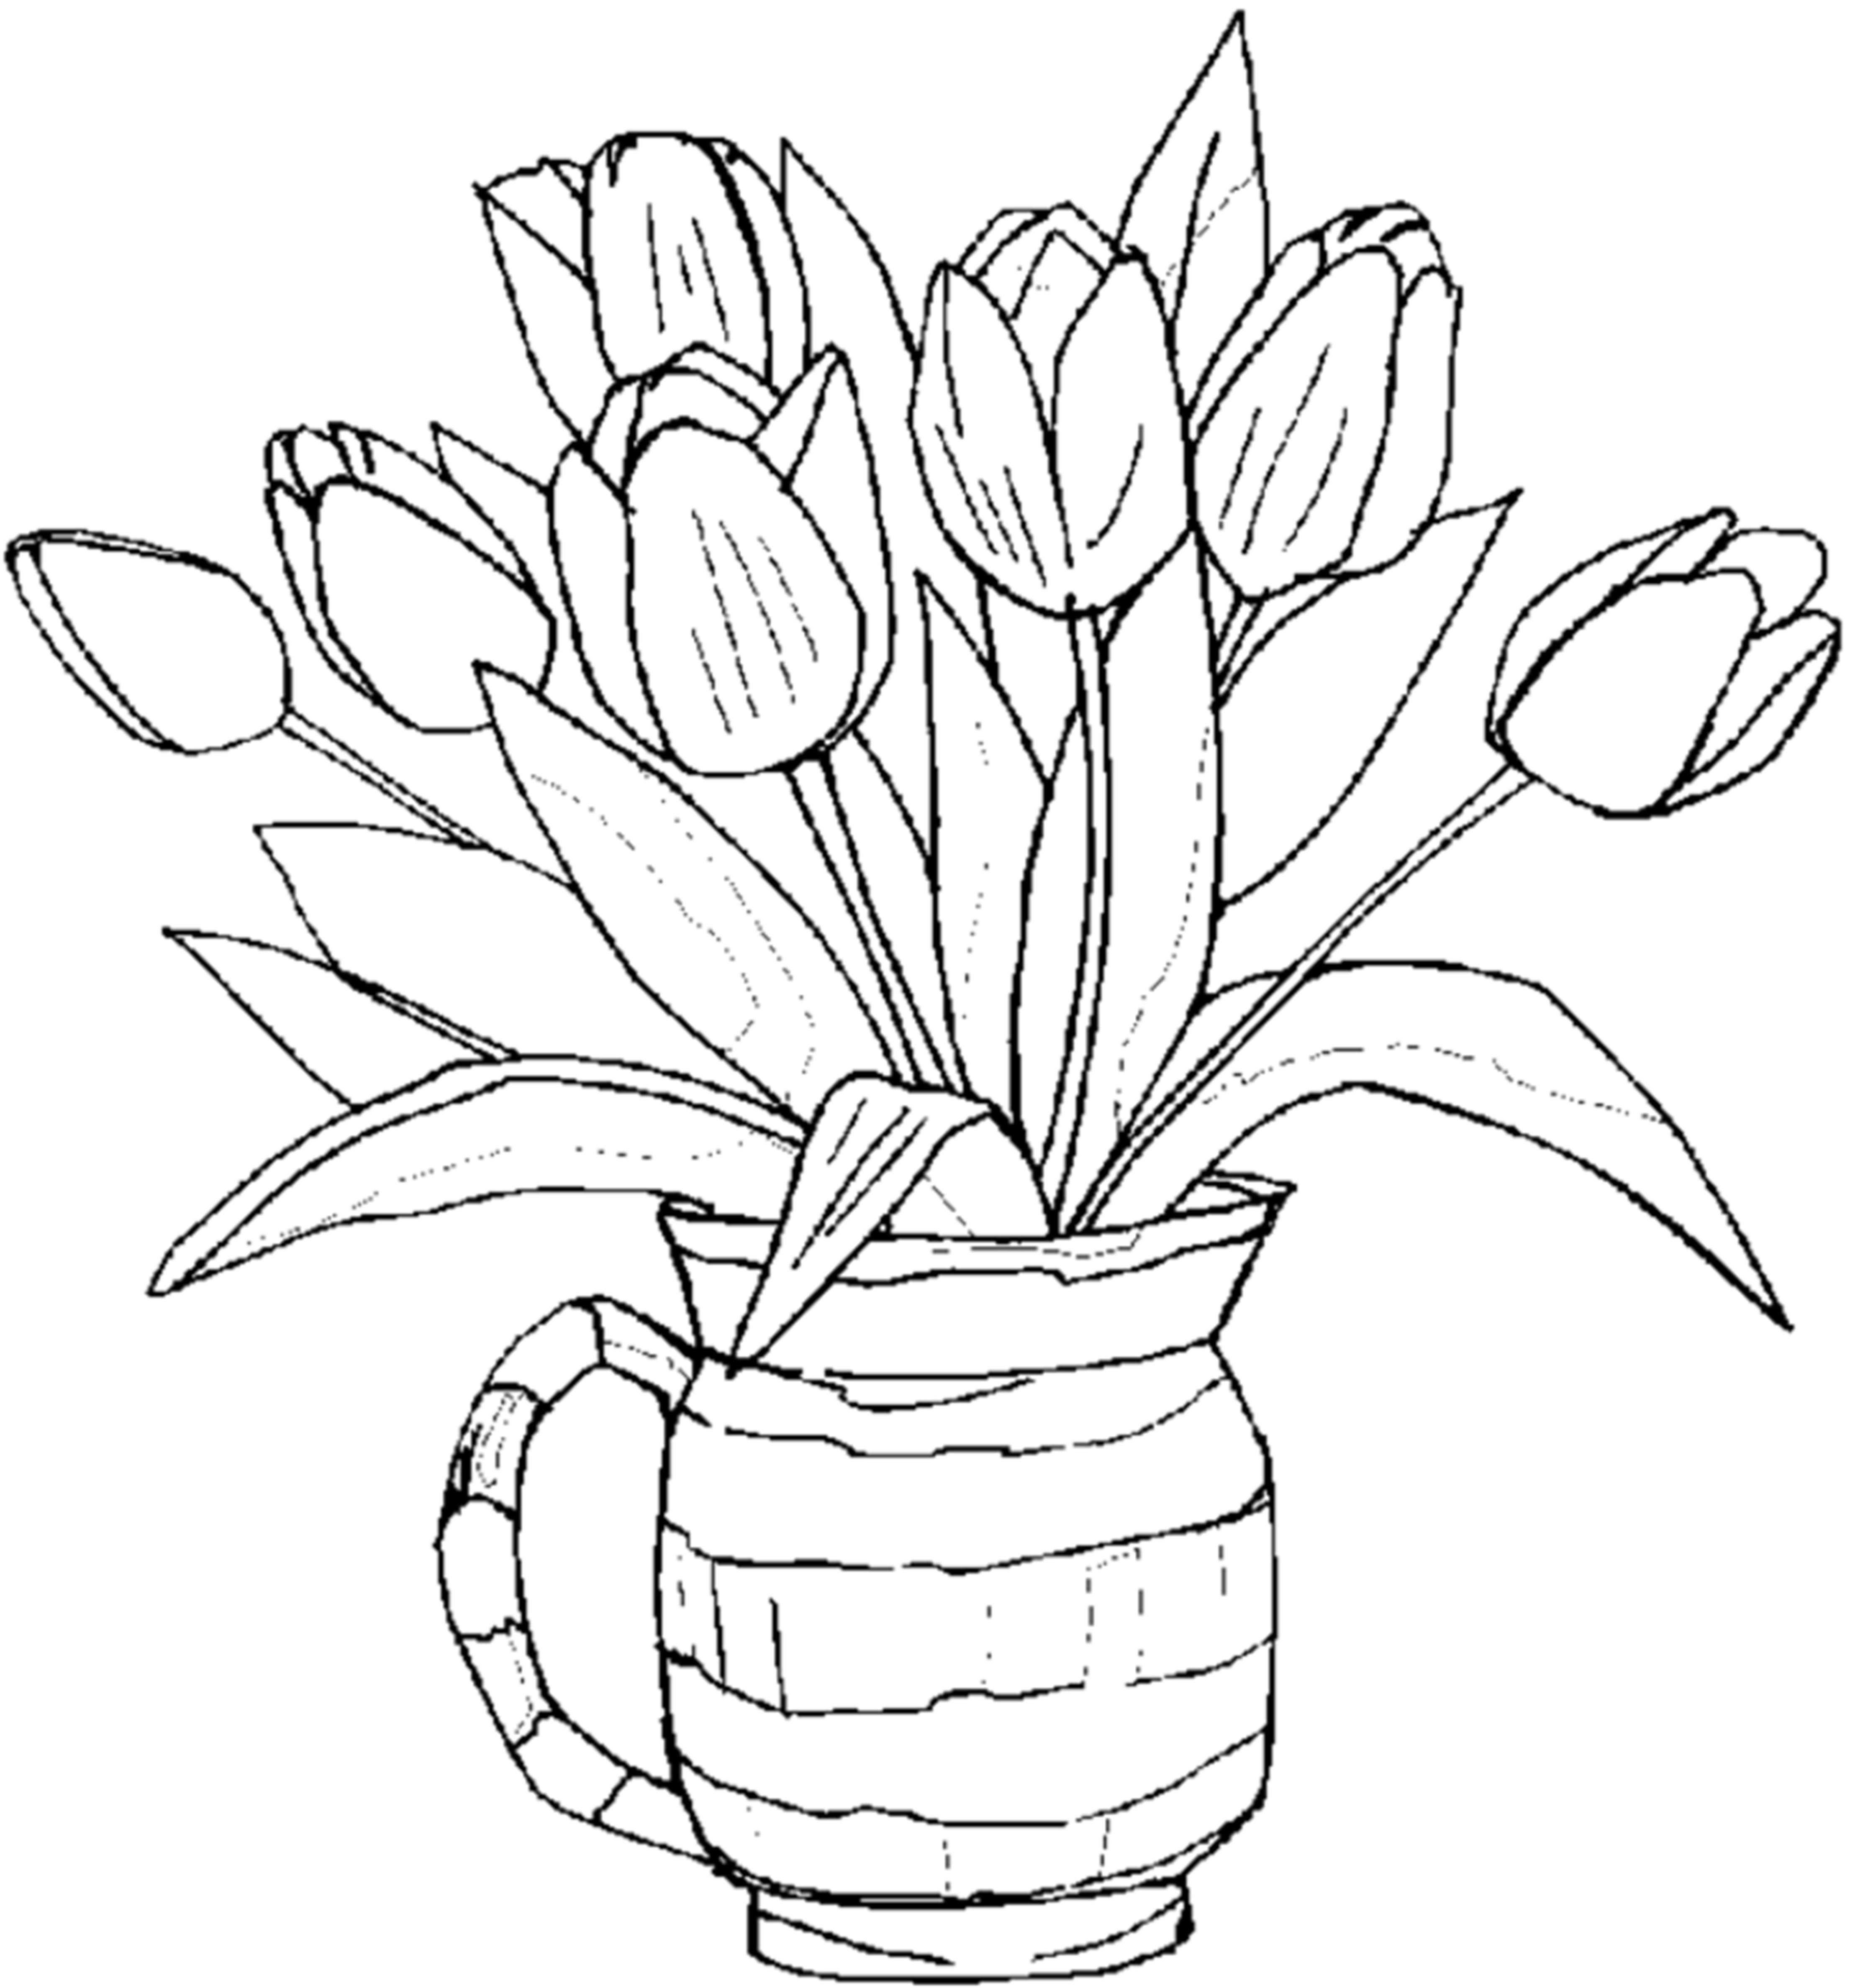 Free Flower Coloring Pages For Adults
 Free Printable Flower Coloring Pages For Kids Best